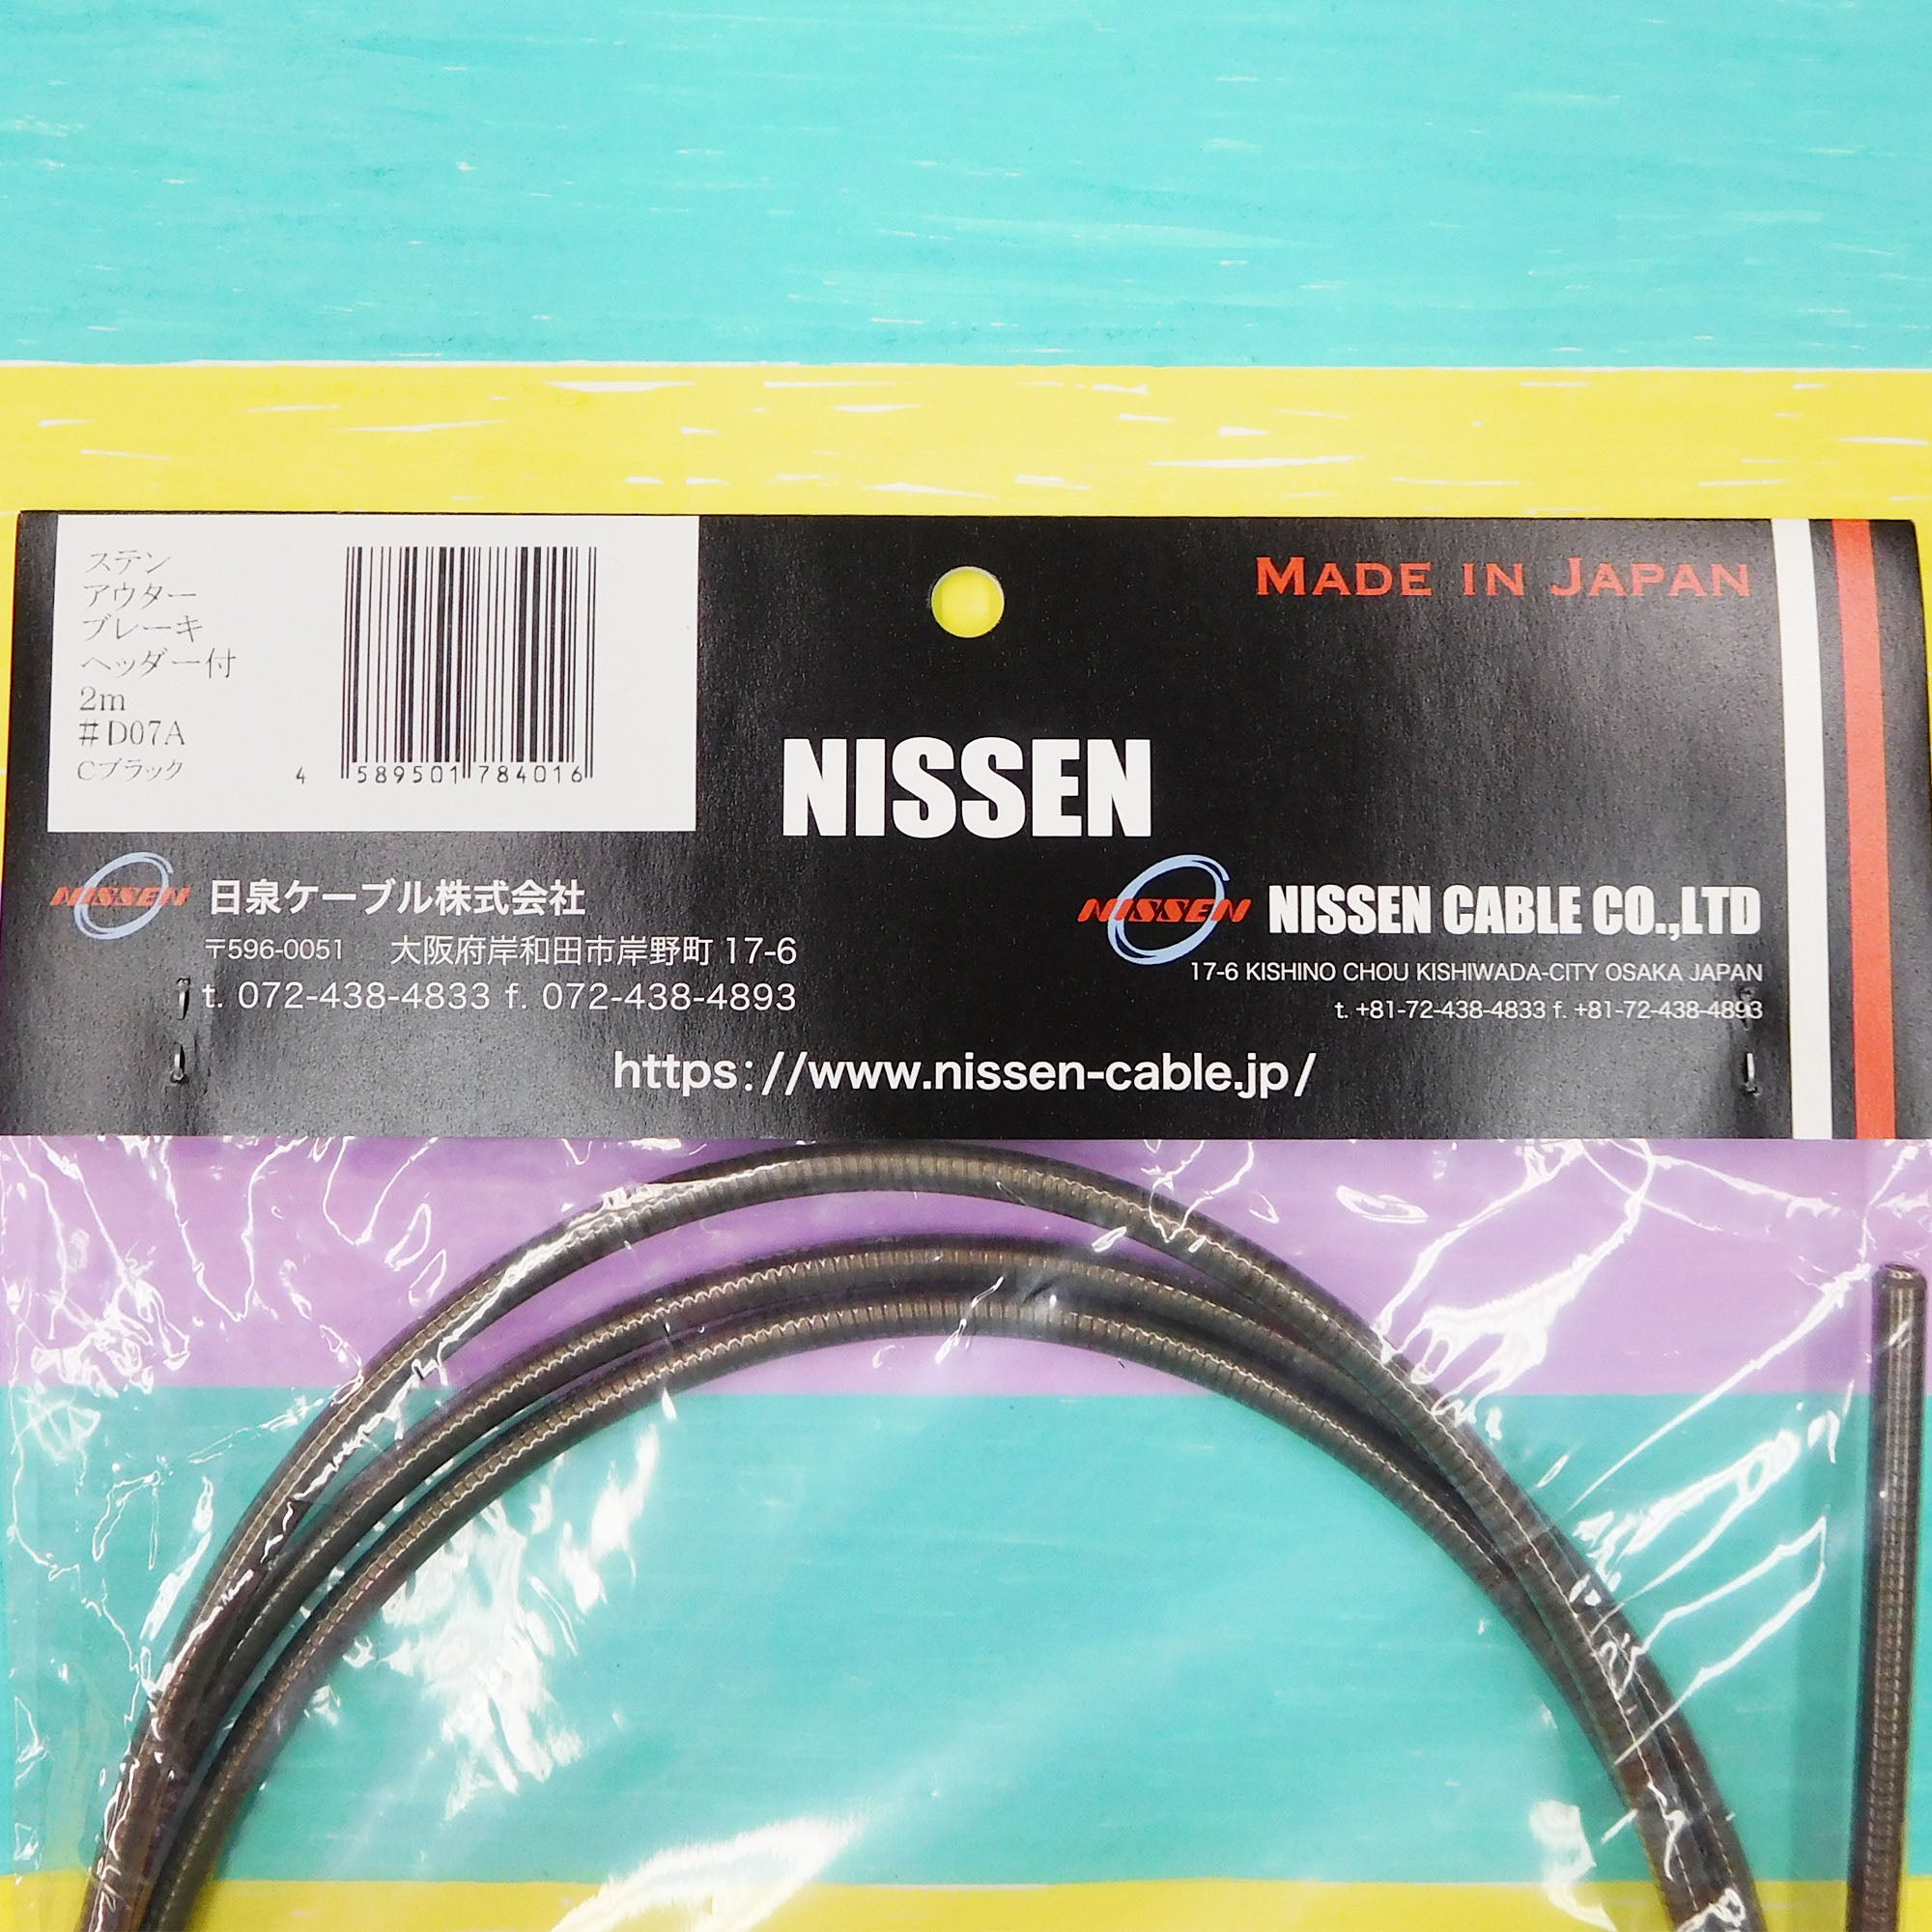 NISSEN STAINLESS STEEL *BRAKE* OUTER CASING 2m CLEAR BLACK 